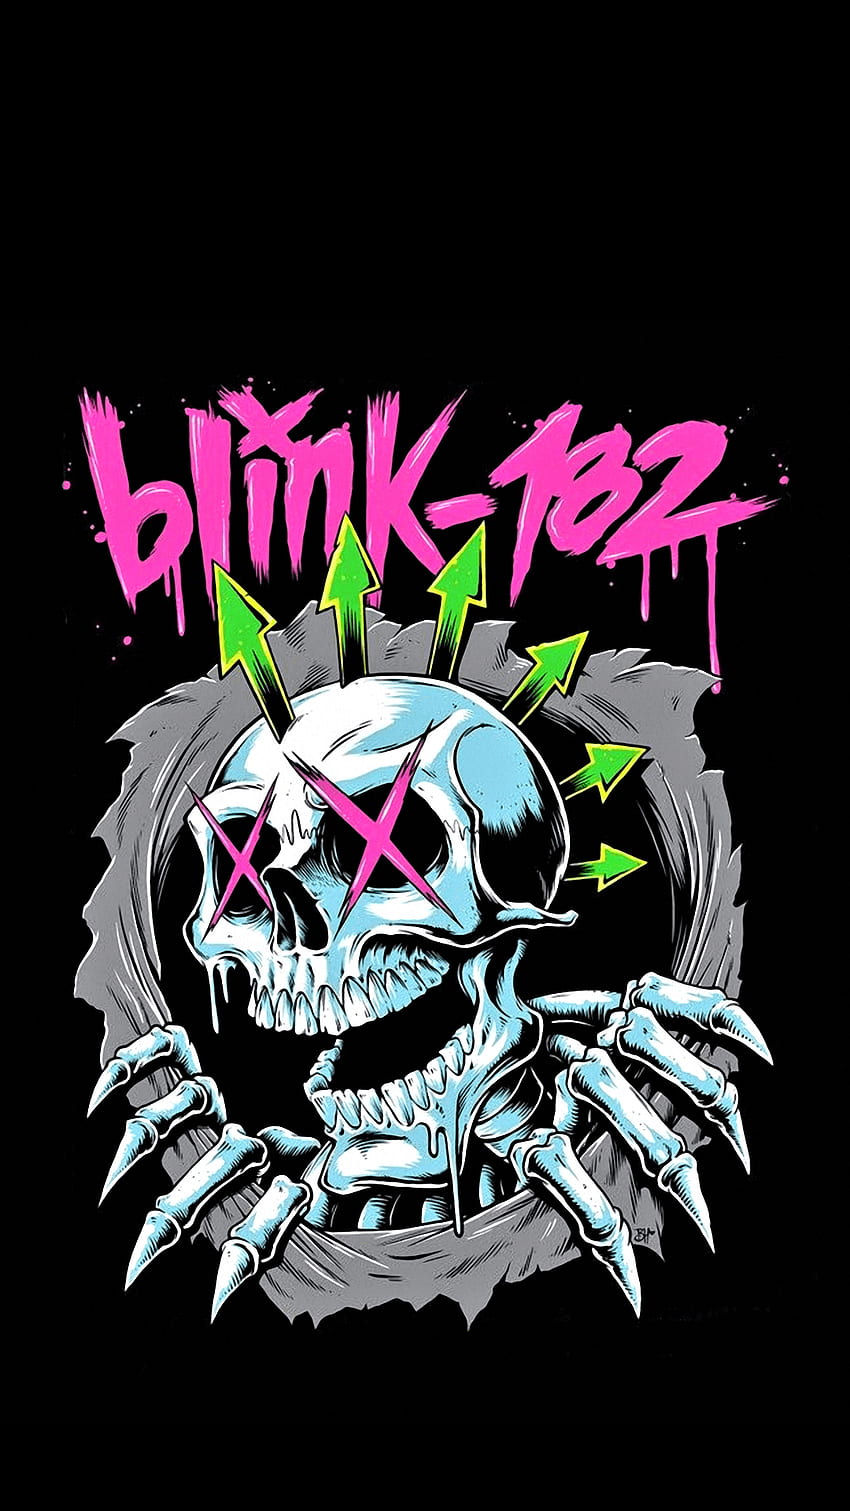 I made another Blink-182 wallpaper. Hope you like it : r/Blink182